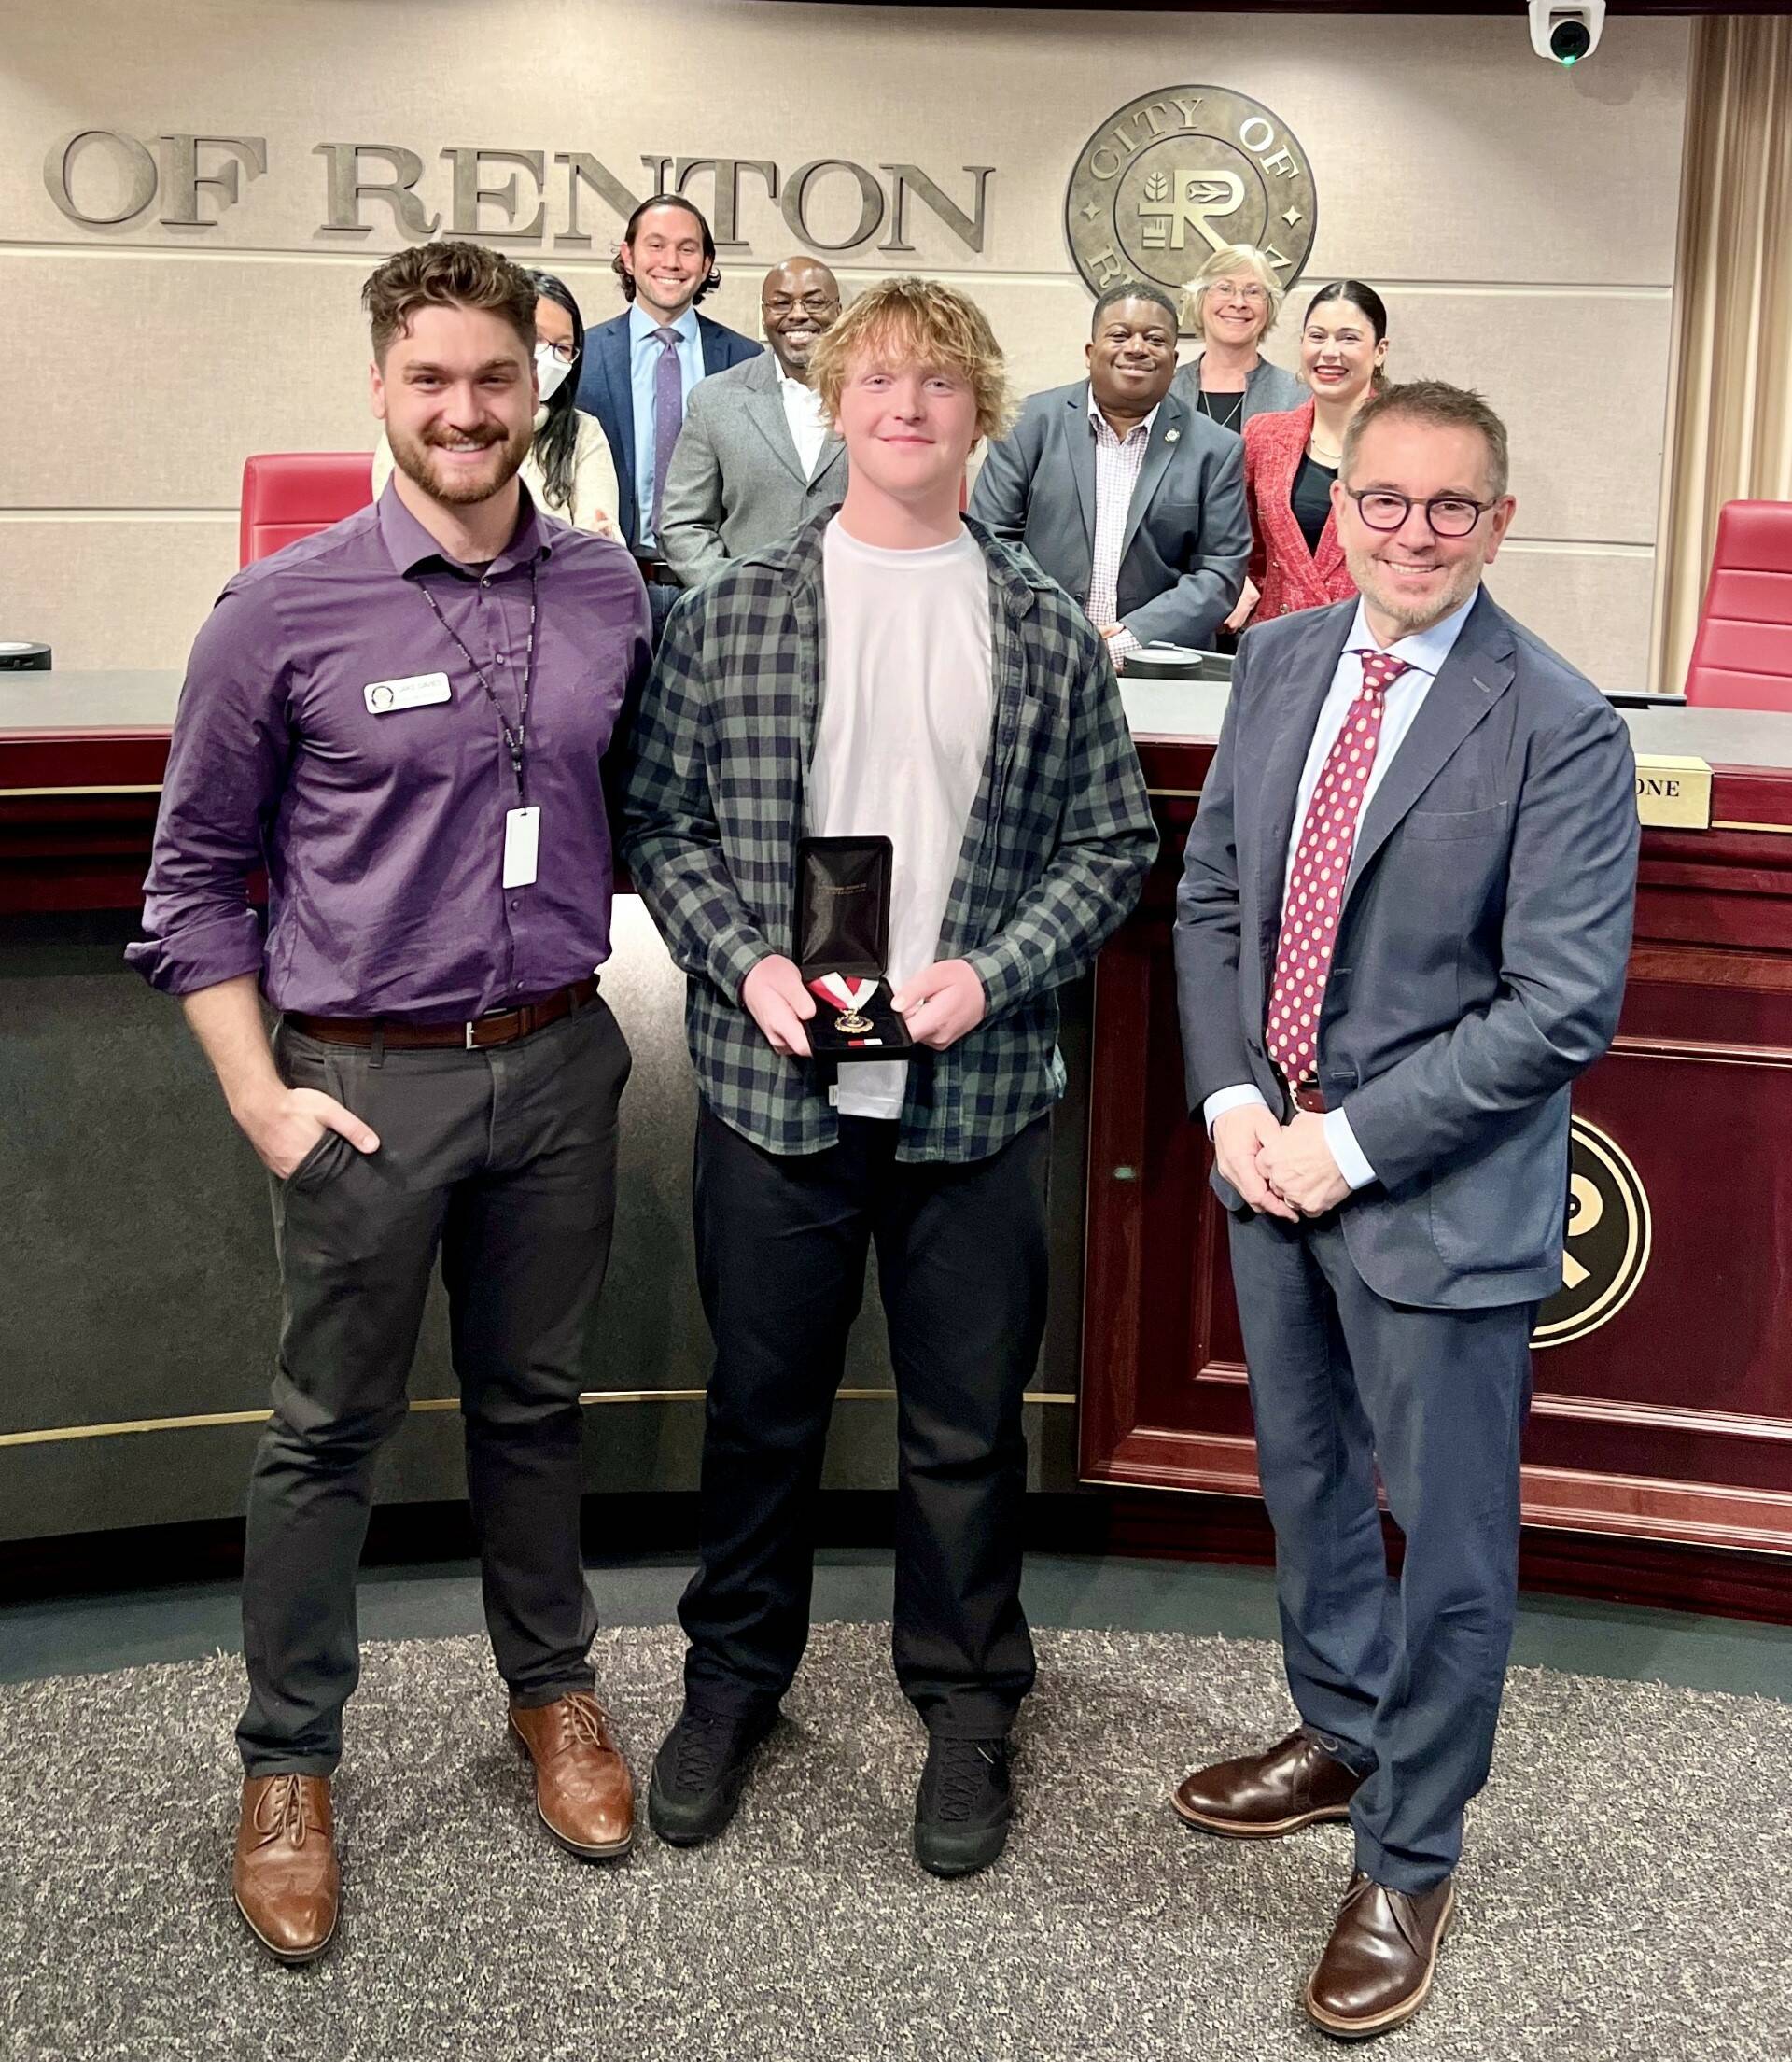 Braeden McSweeney, center, holds his Renton Police Department Life Saving Medal, standing with his boss and coach, Jake Davies, Mayor Pavone and the Renton City Council in the background. Courtesy photo.